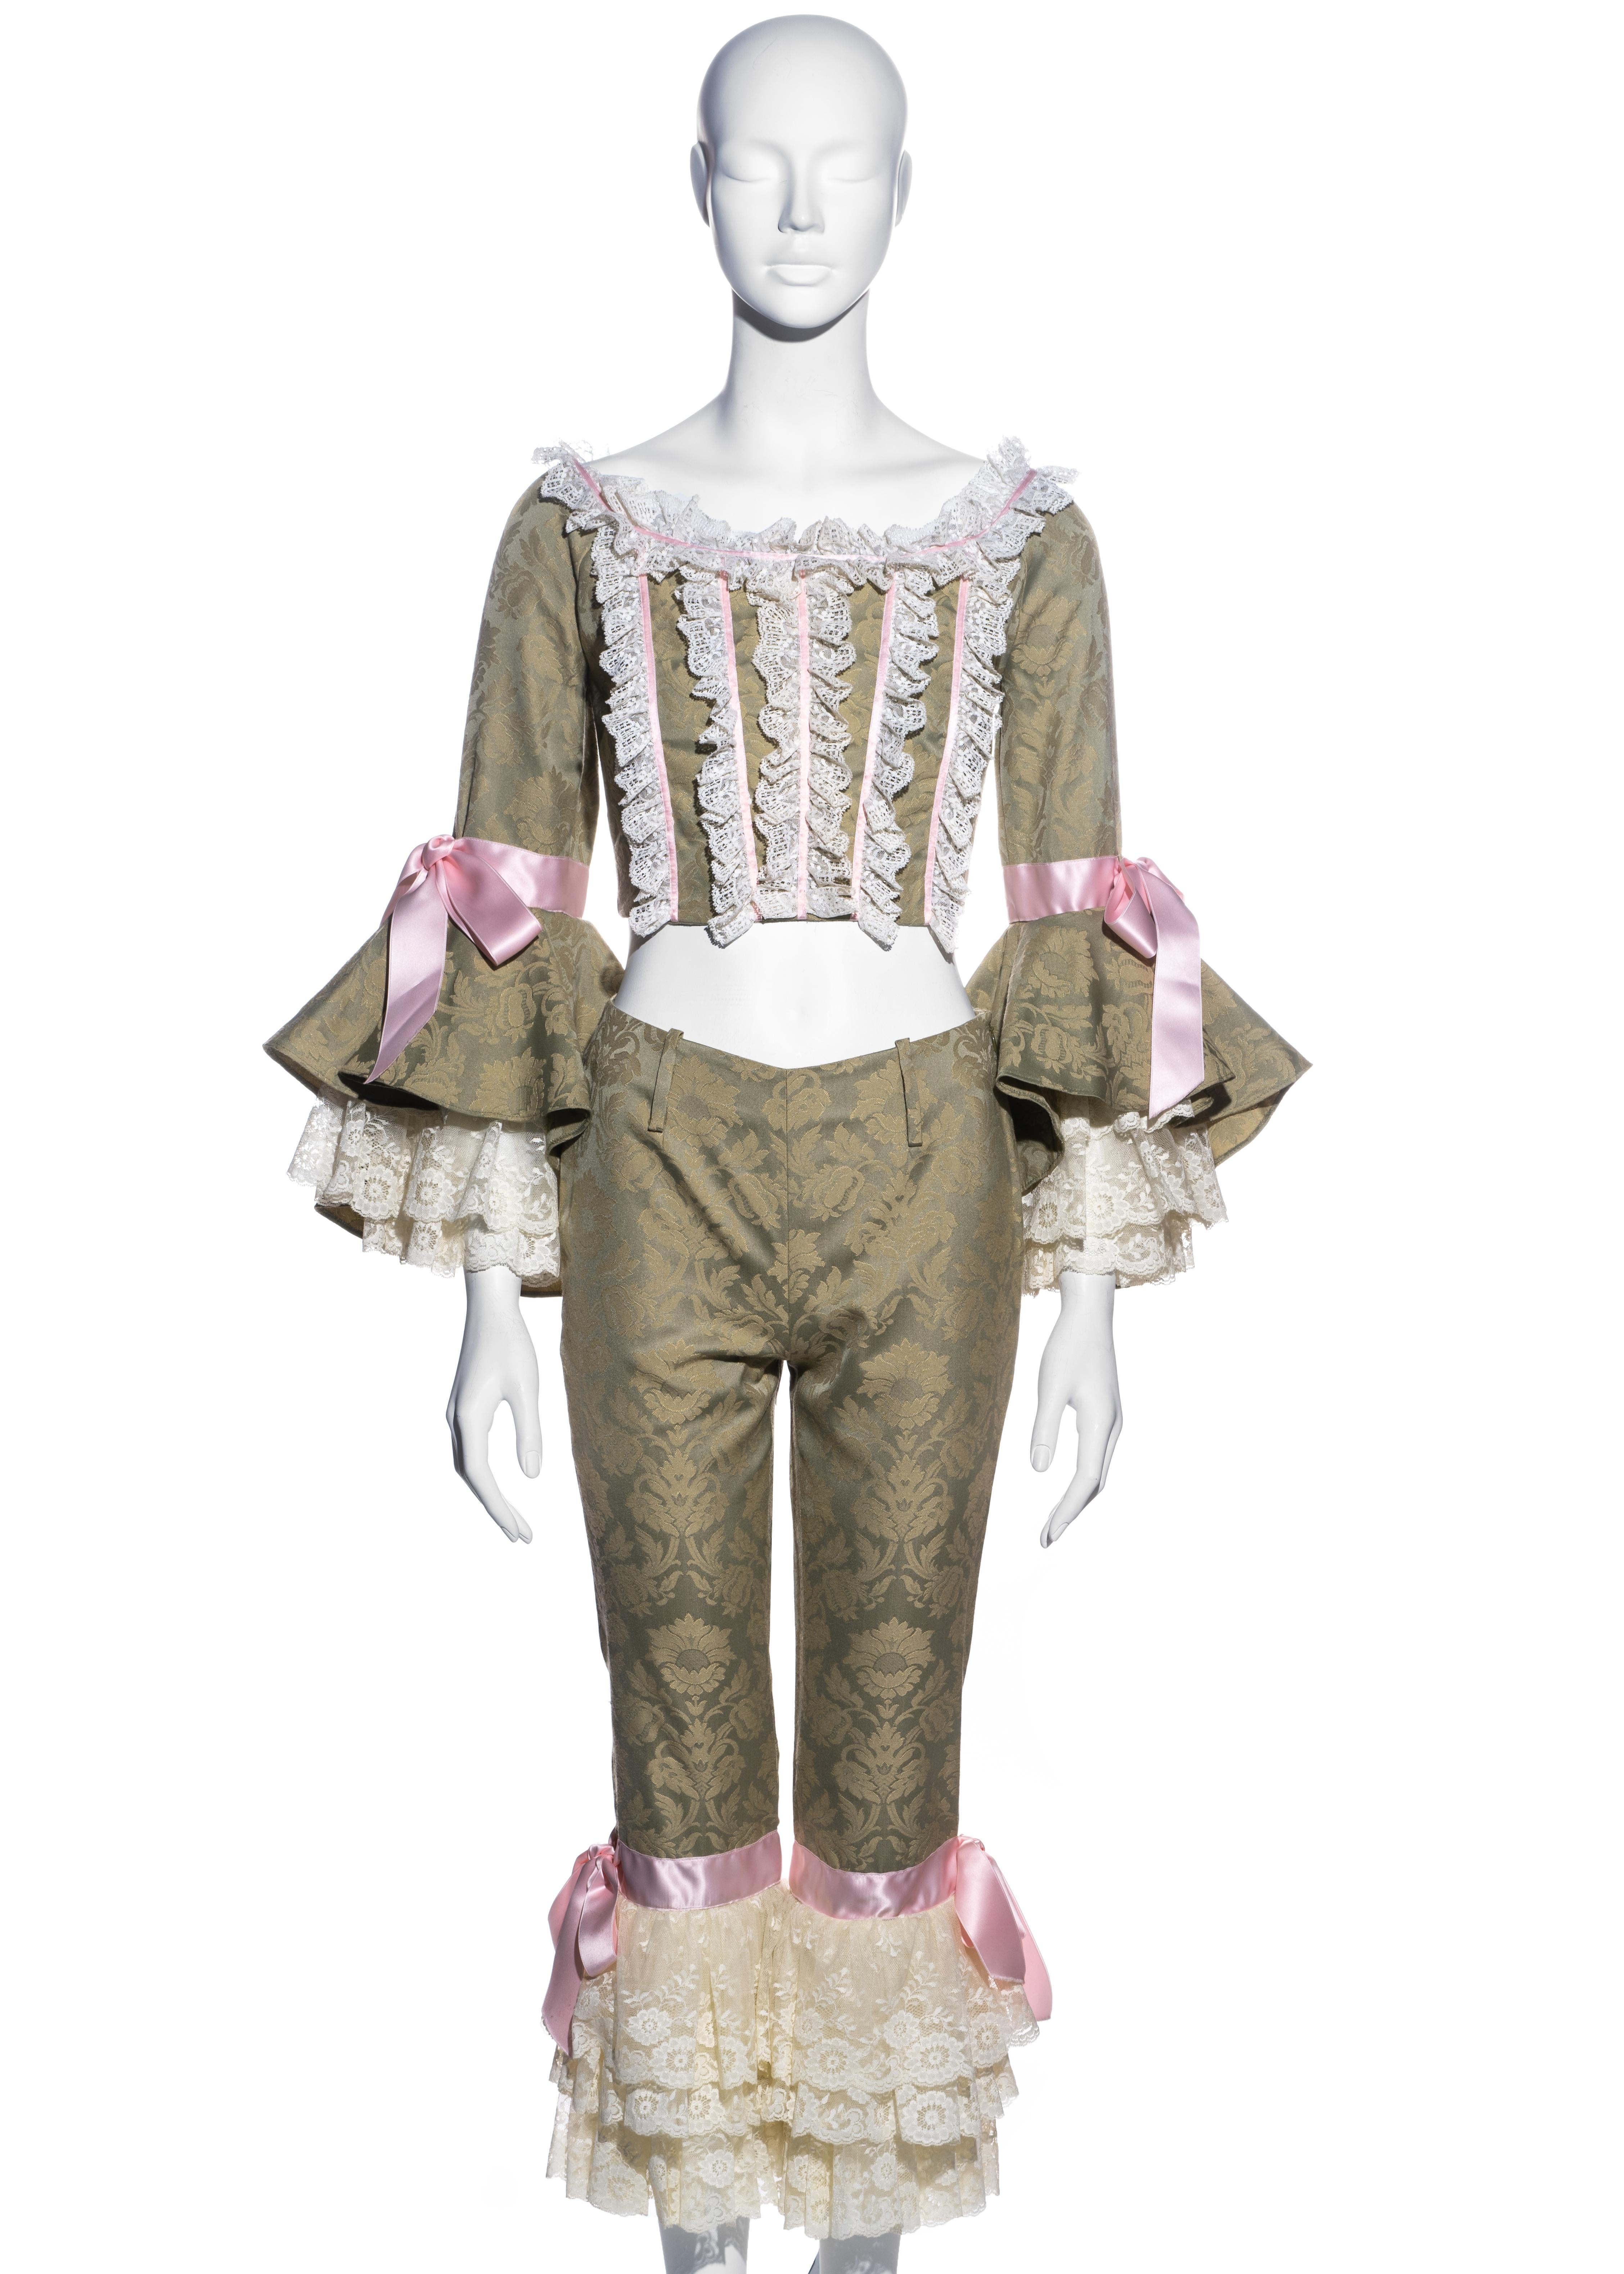 ▪ Dolce & Gabbana (D&G) green brocade corset and pants 
▪ 53% Polyester, 47% Rayon
▪ Cropped corset 
▪ Fitted capri pants 
▪ Bell Sleeves 
▪ Cream lace trim 
▪ Pink satin bow details
▪ Size Small
▪ Spring-Summer 2000